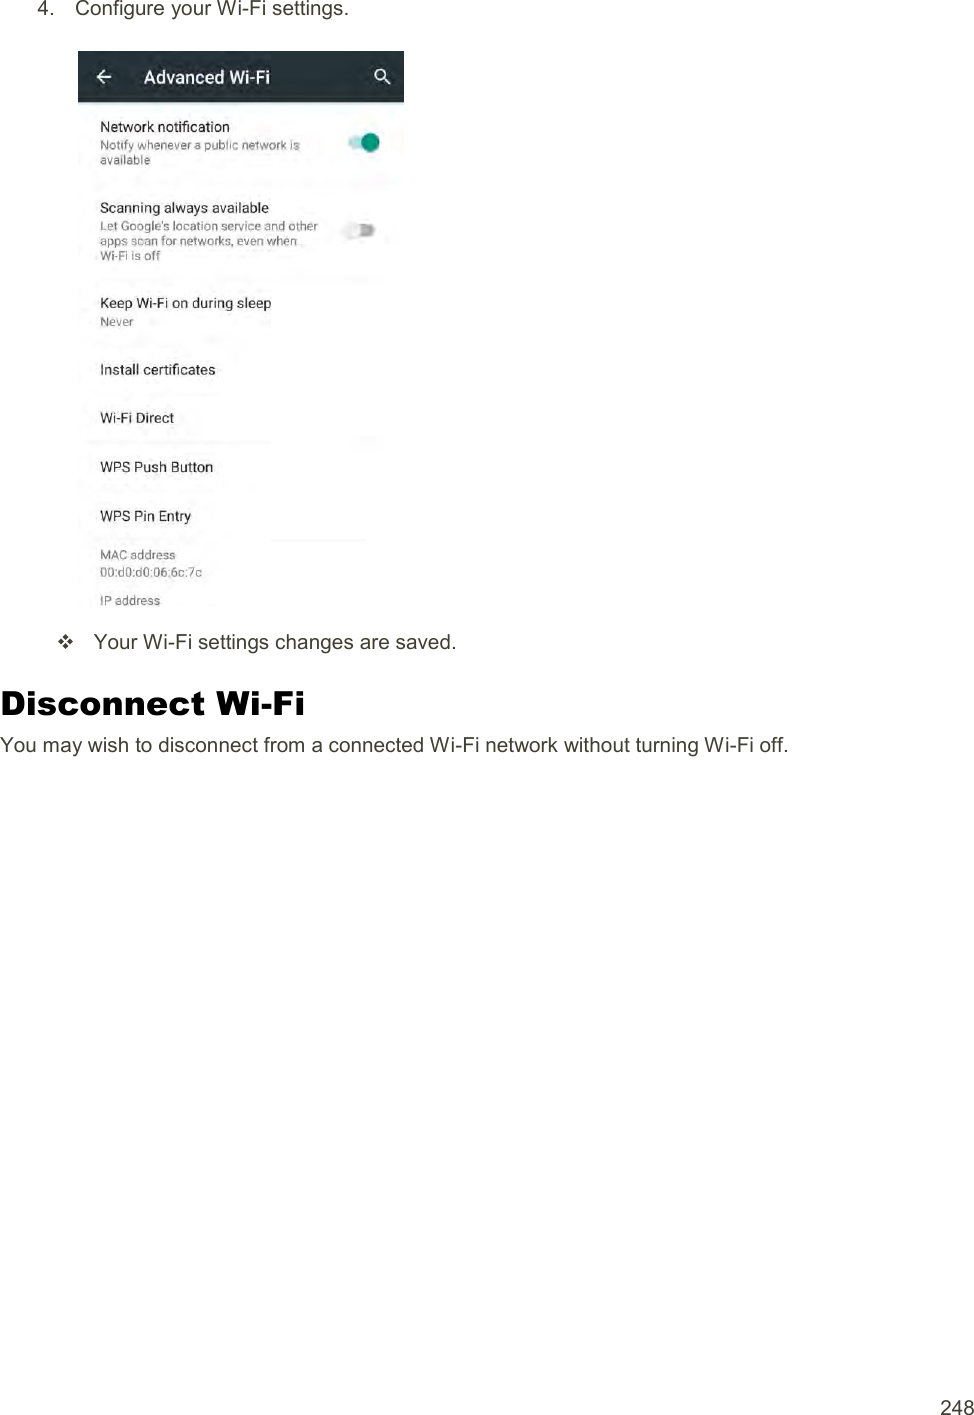  248 4.  Configure your Wi-Fi settings.     Your Wi-Fi settings changes are saved. Disconnect Wi-Fi You may wish to disconnect from a connected Wi-Fi network without turning Wi-Fi off. 